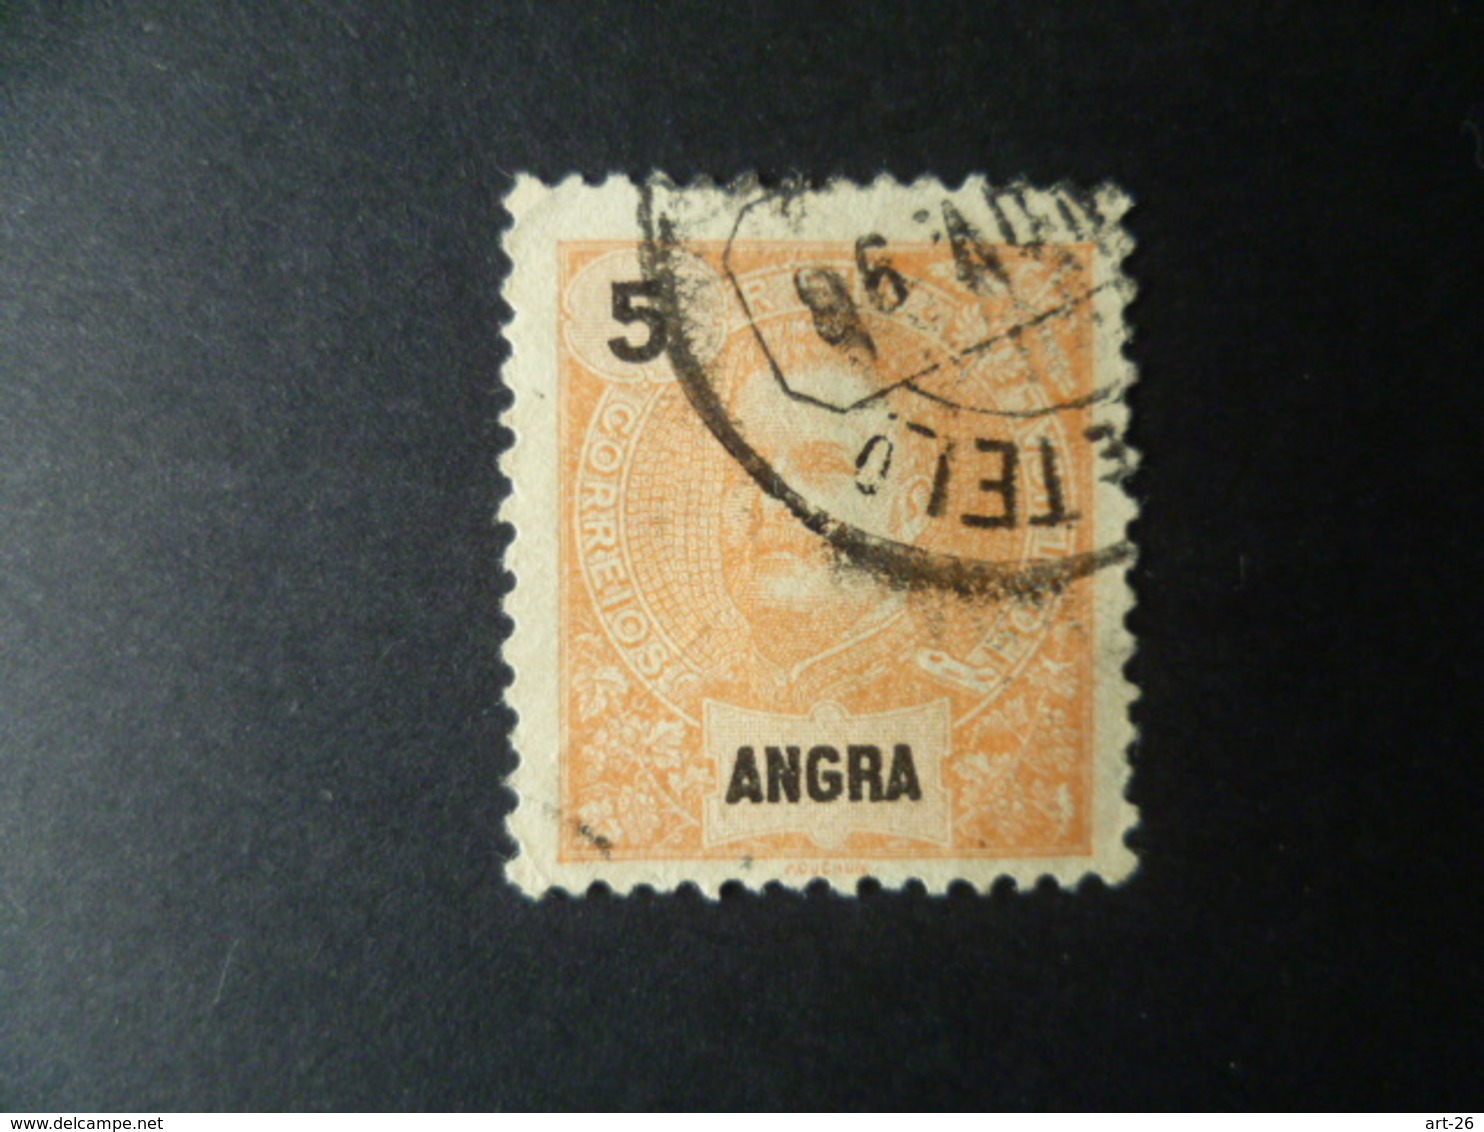 TIMBRE  ANGRA 5 CTS   OBLITERE - Angra